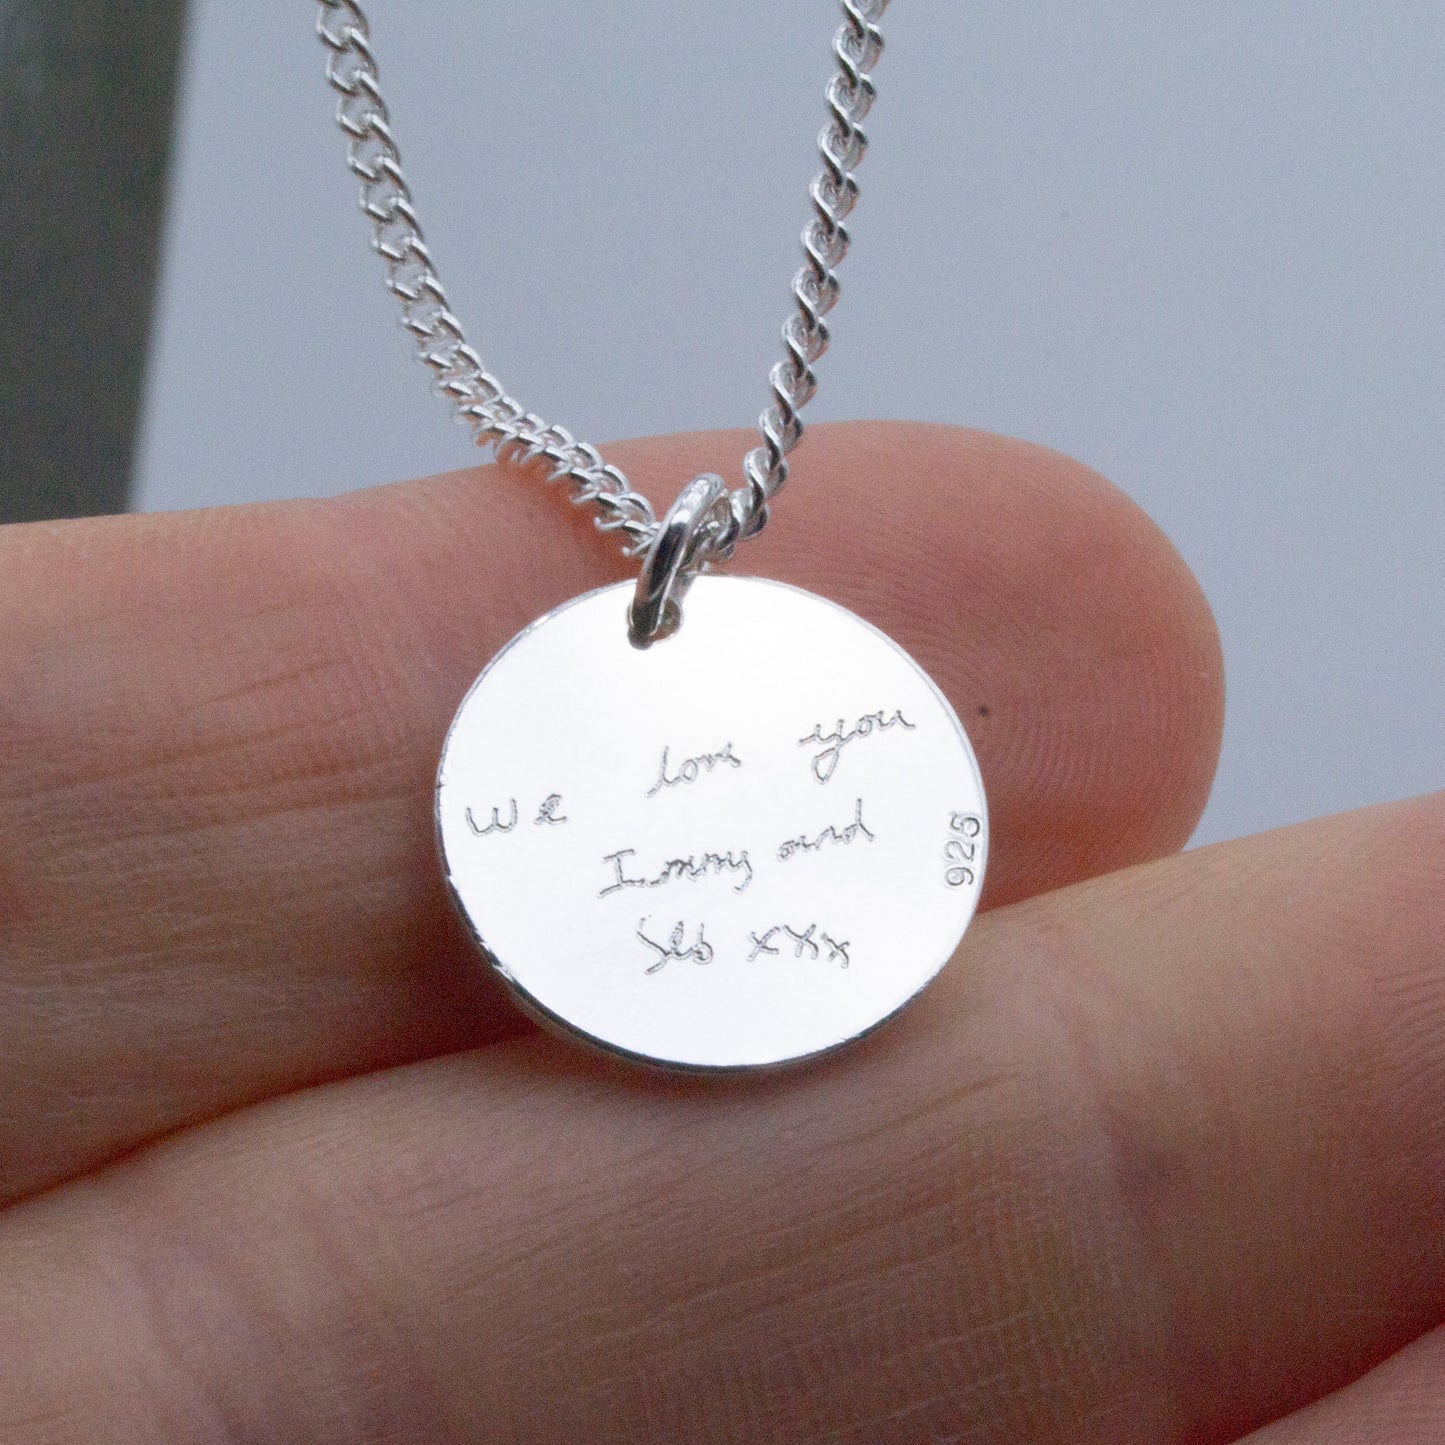 Kid's drawing pendant necklace in sterling silver